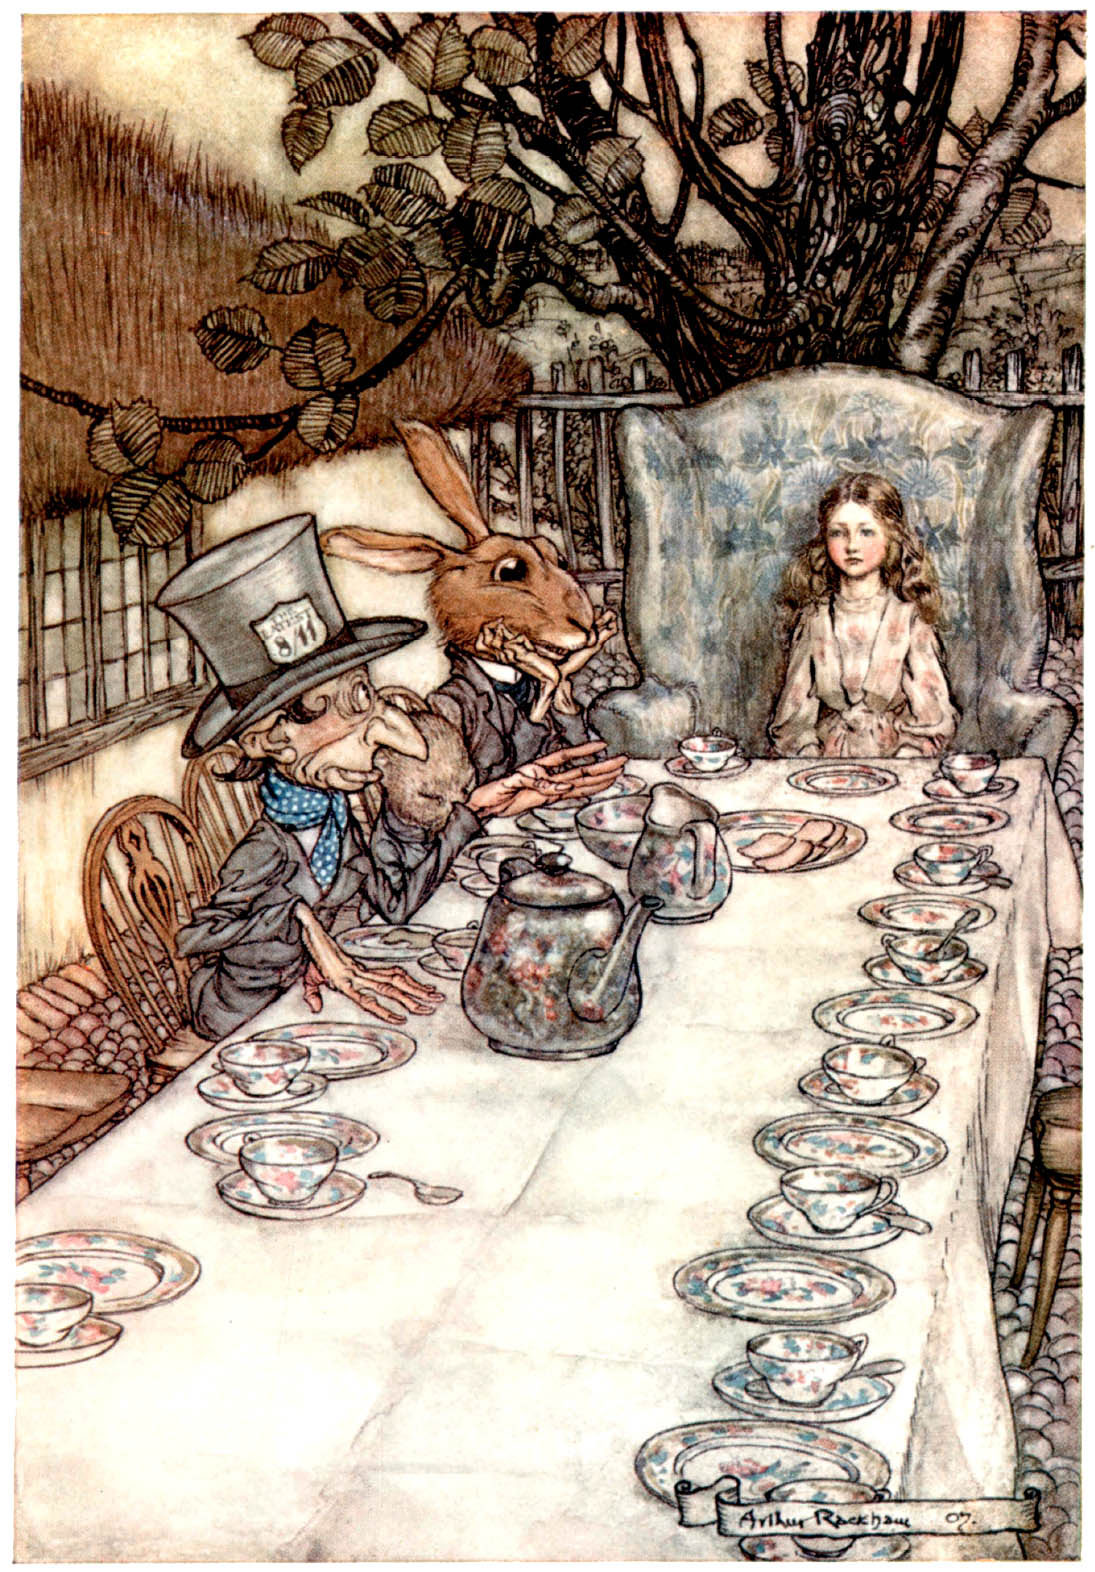 Surprising Facts About Alice in Wonderland - Alice in 